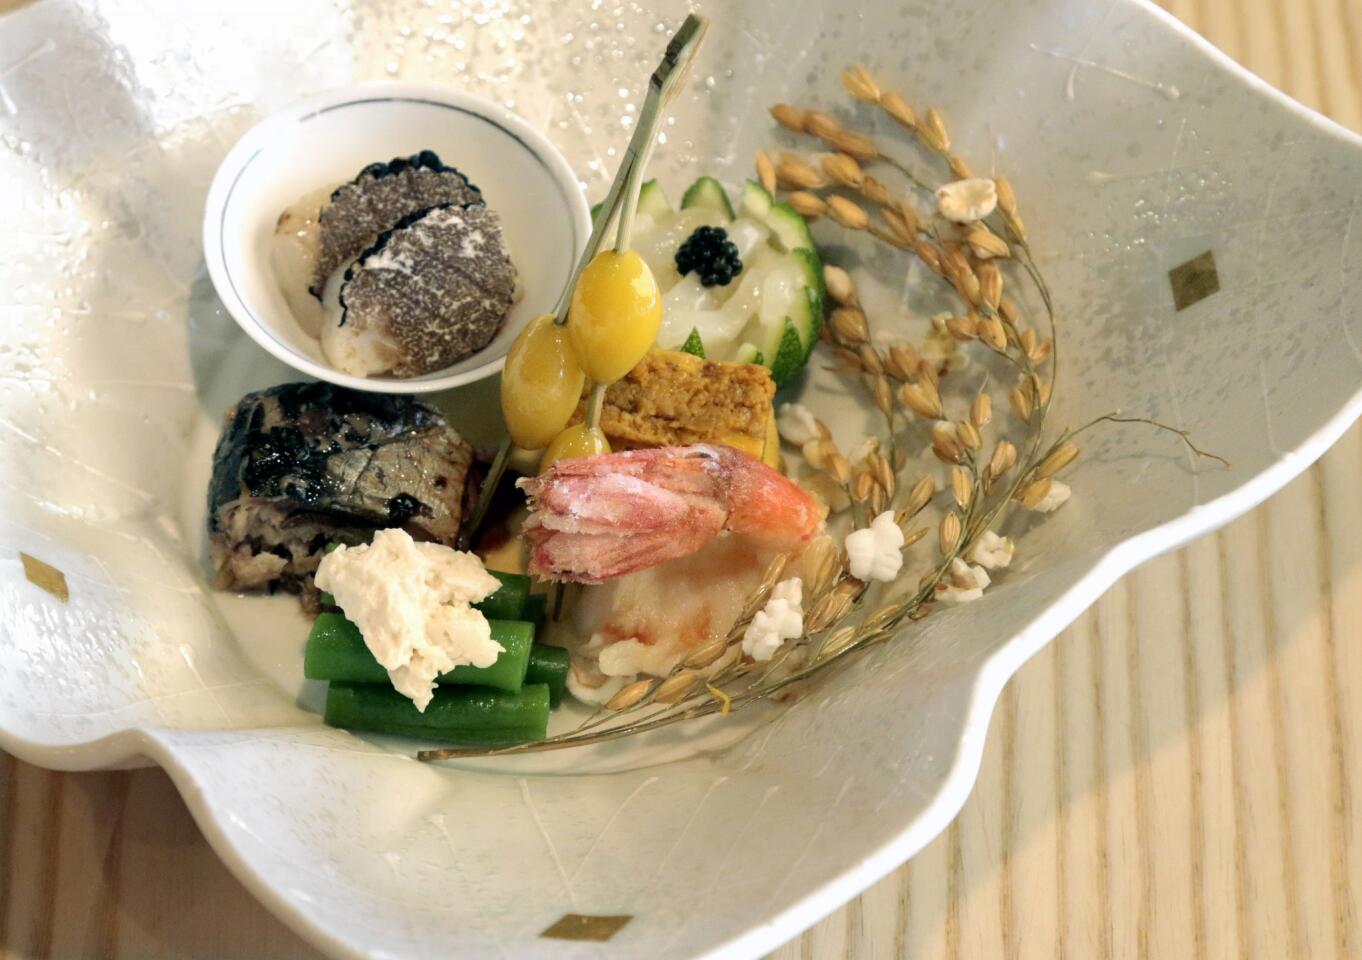 An appetizer assortment includes deep-fried sweet shrimp, sea urchin with egg omelet, deep-fried gingko nuts, sardines simmered in sweet soy sauce, string beans with tofu paste, scallop marinated in truffle oil and squid marinated in a butter spice mixture.